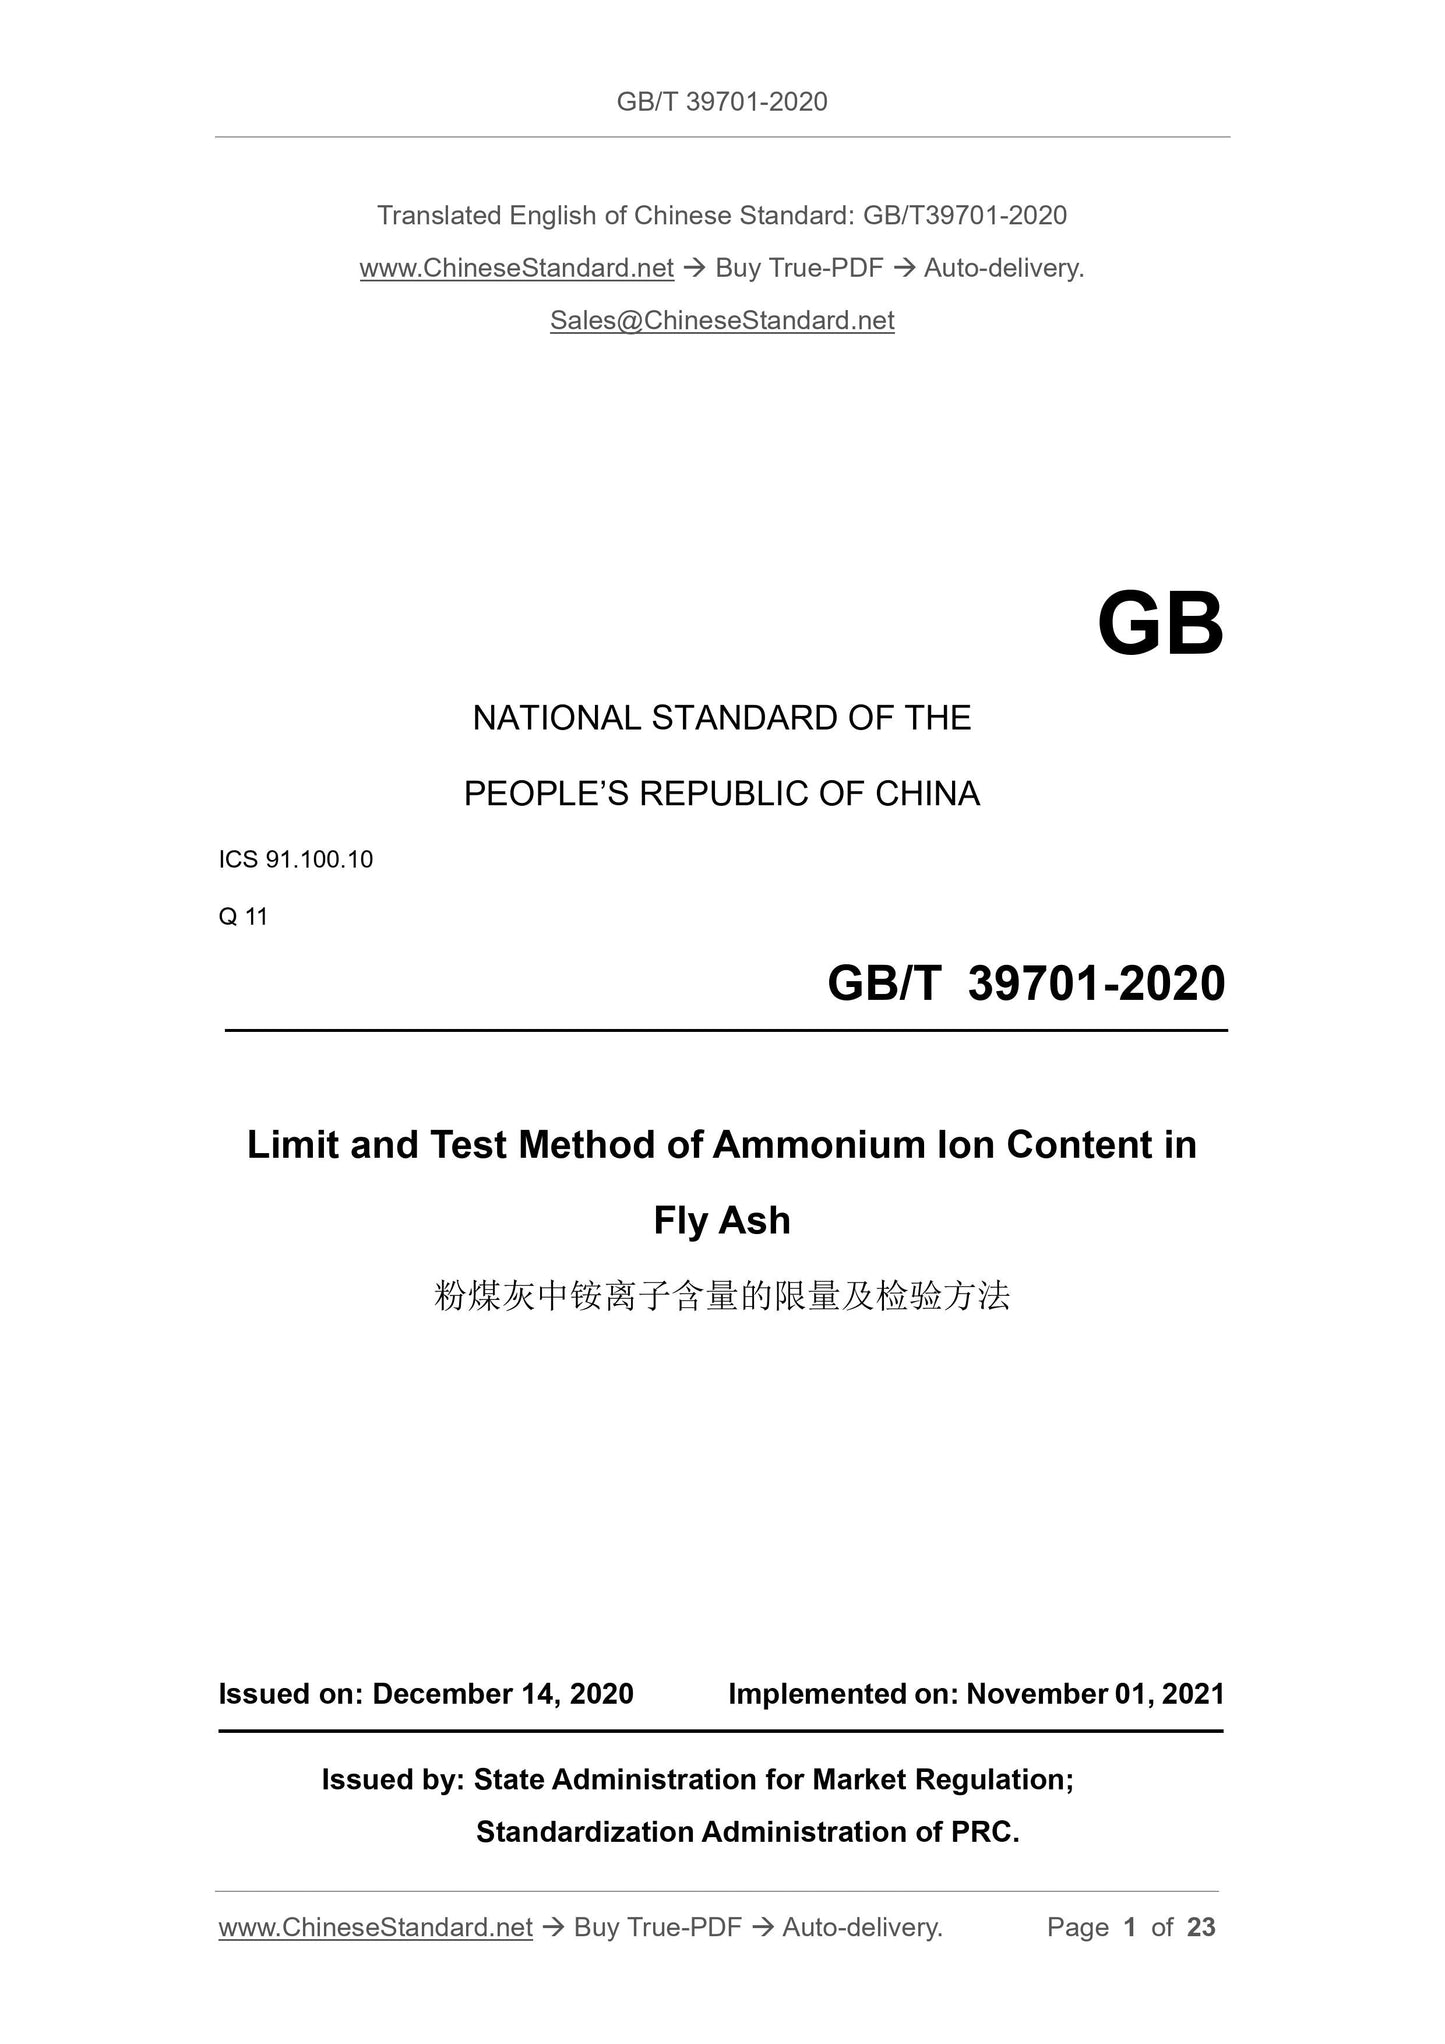 GB/T 39701-2020 Page 1